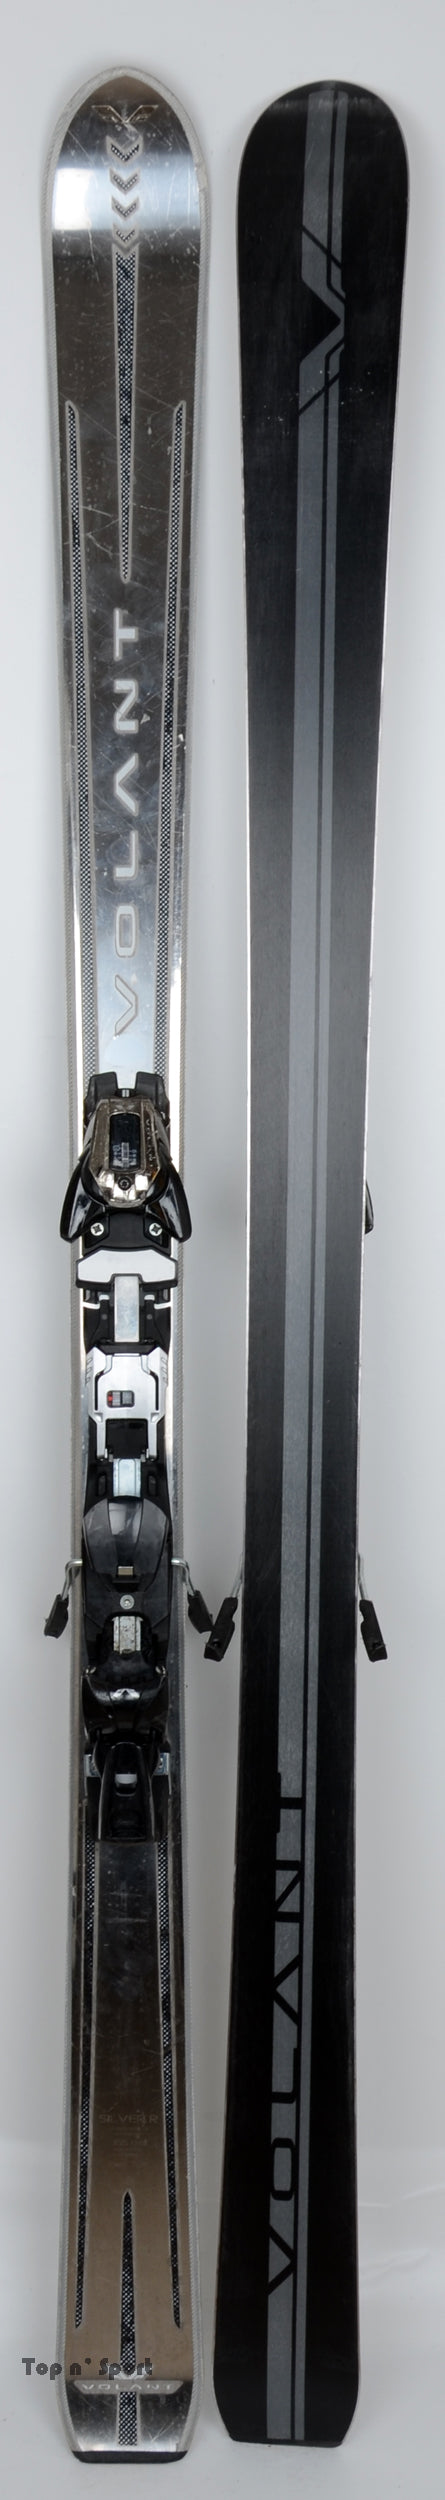 Volant SILVER R 80 - skis d'occasion